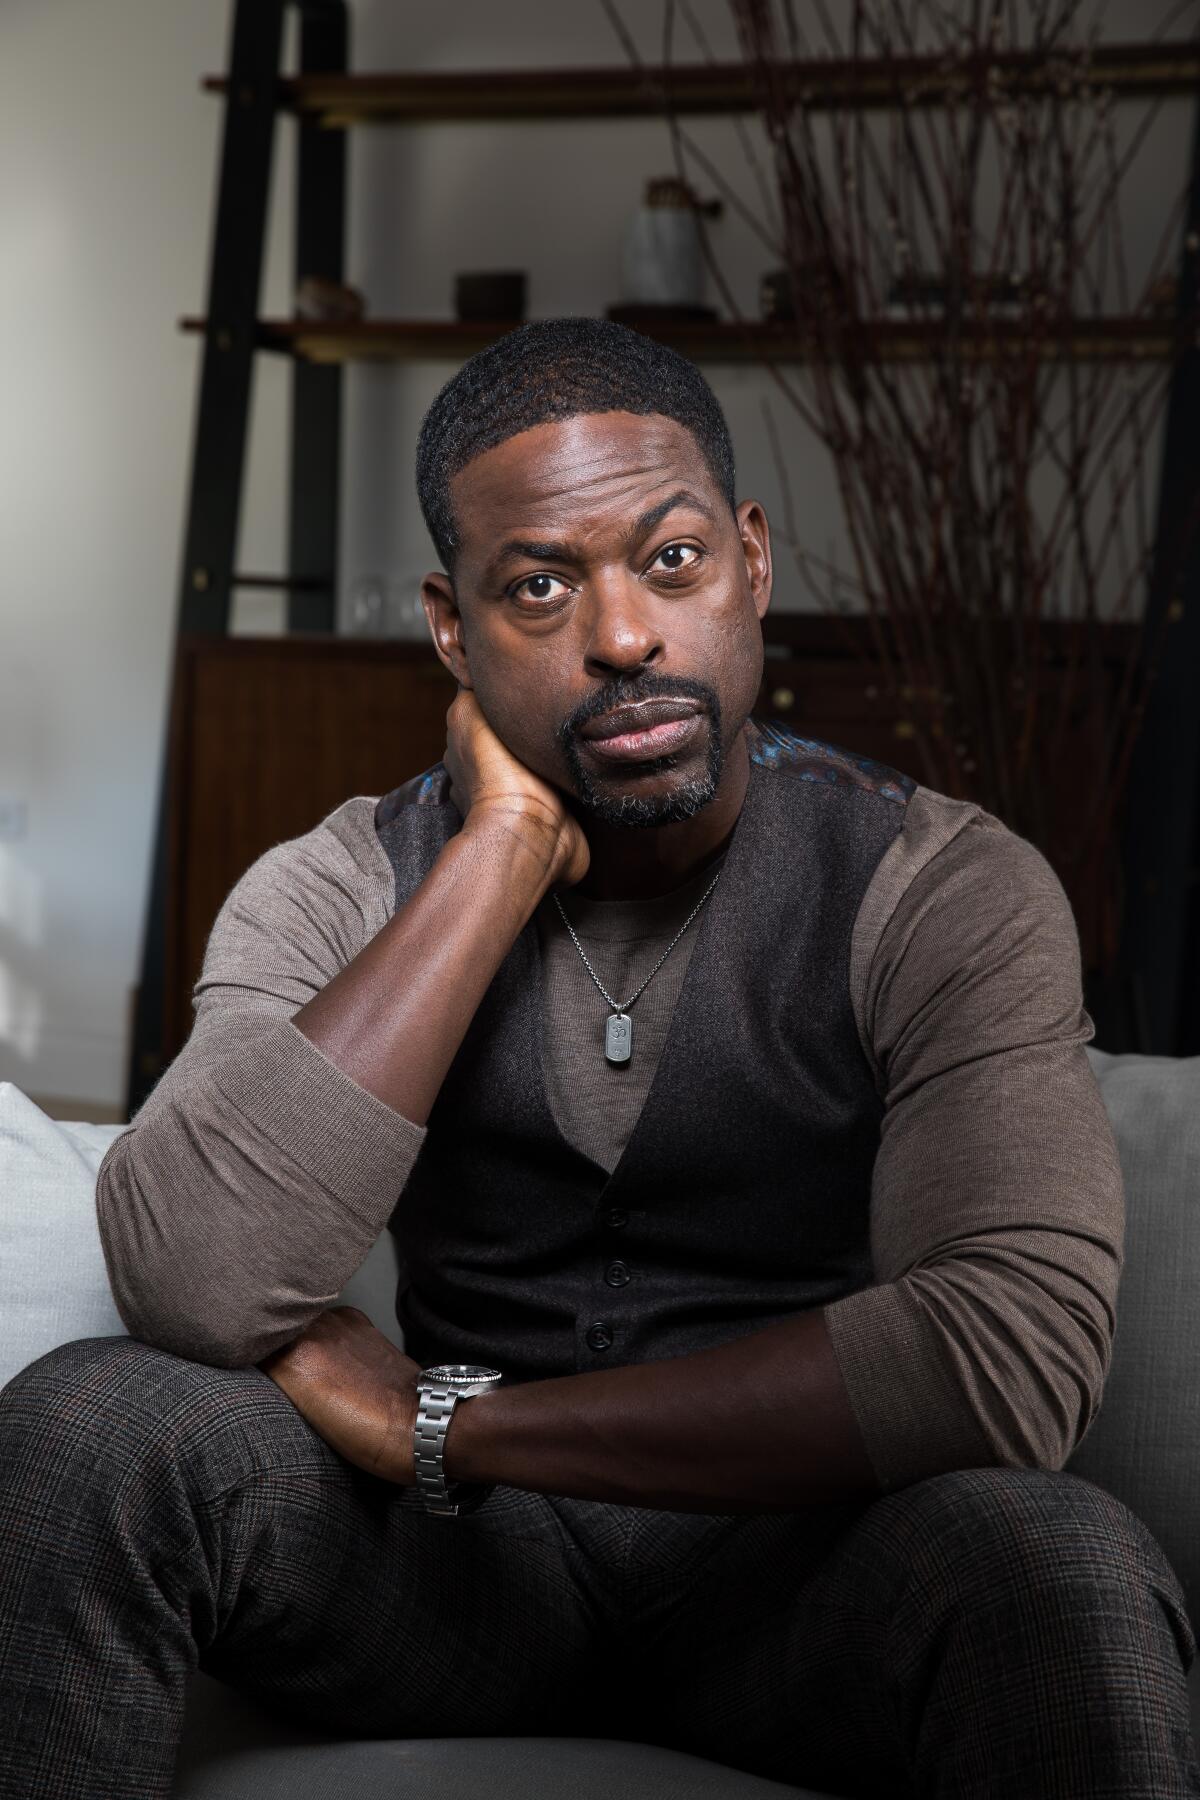 Actor Sterling K. Brown at a James hotel in New York City on Oct. 15, 2019.